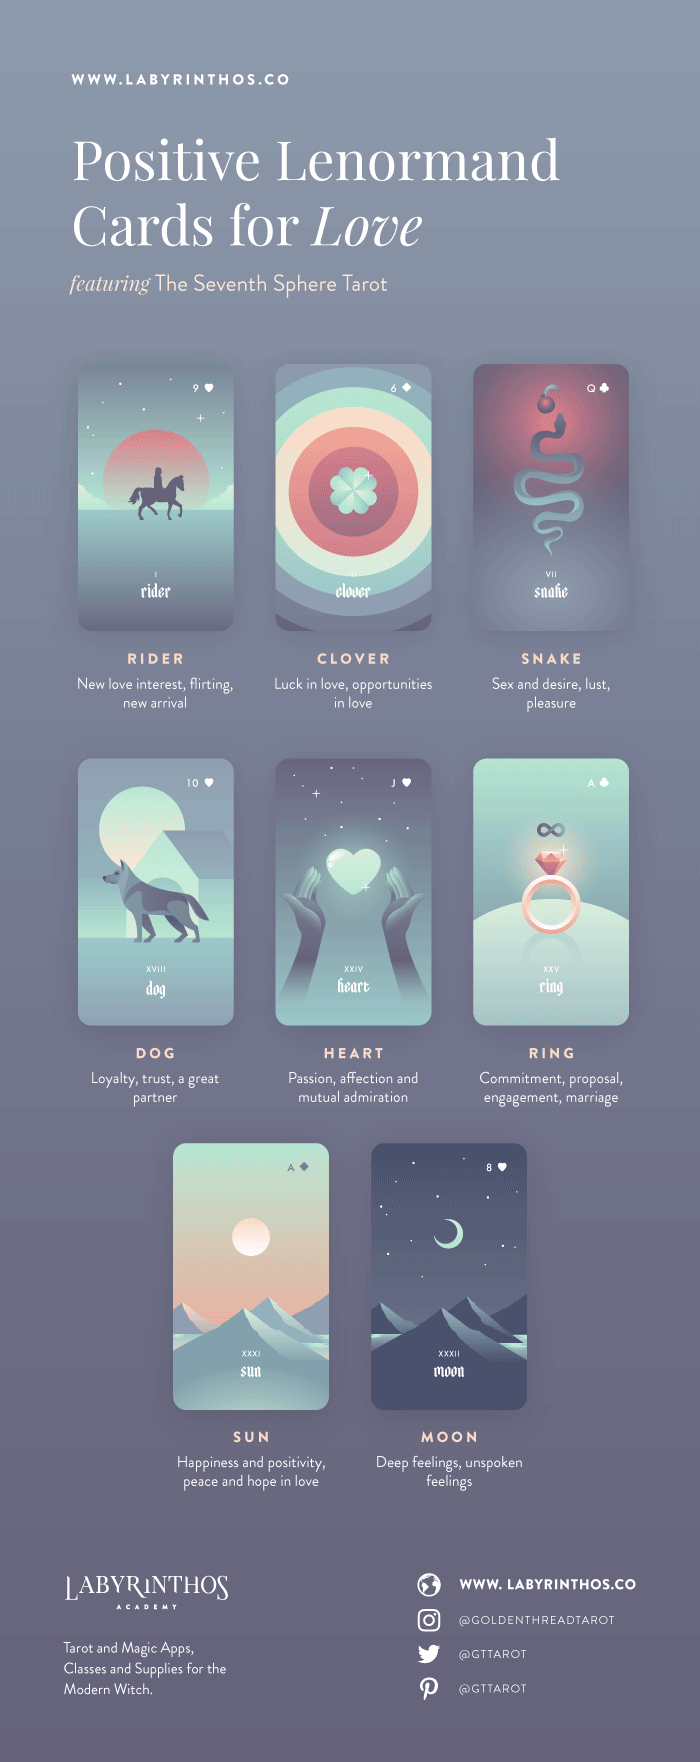 Reading Love Lenormand Cards Infographic - Positive Lenormand Cards in a Love Lenormand Reading